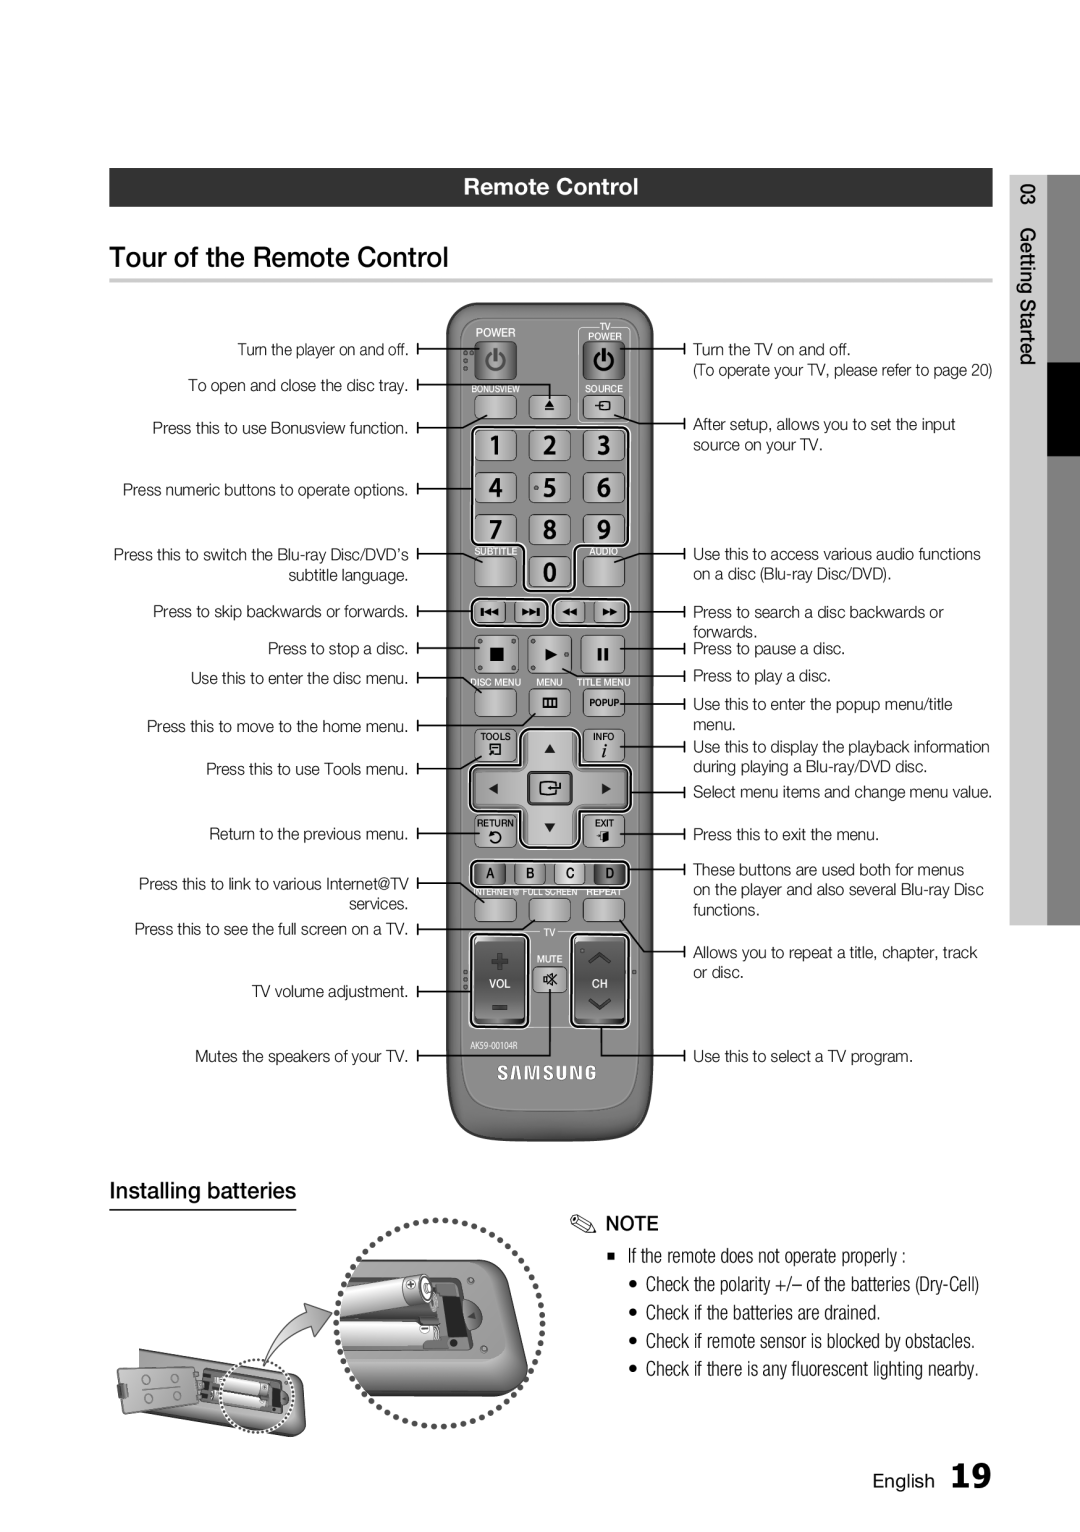 Samsung BD-C7500/XEE, BD-C7500/XEN manual Tour of the Remote Control, Installing batteries, Getting, Started, English 